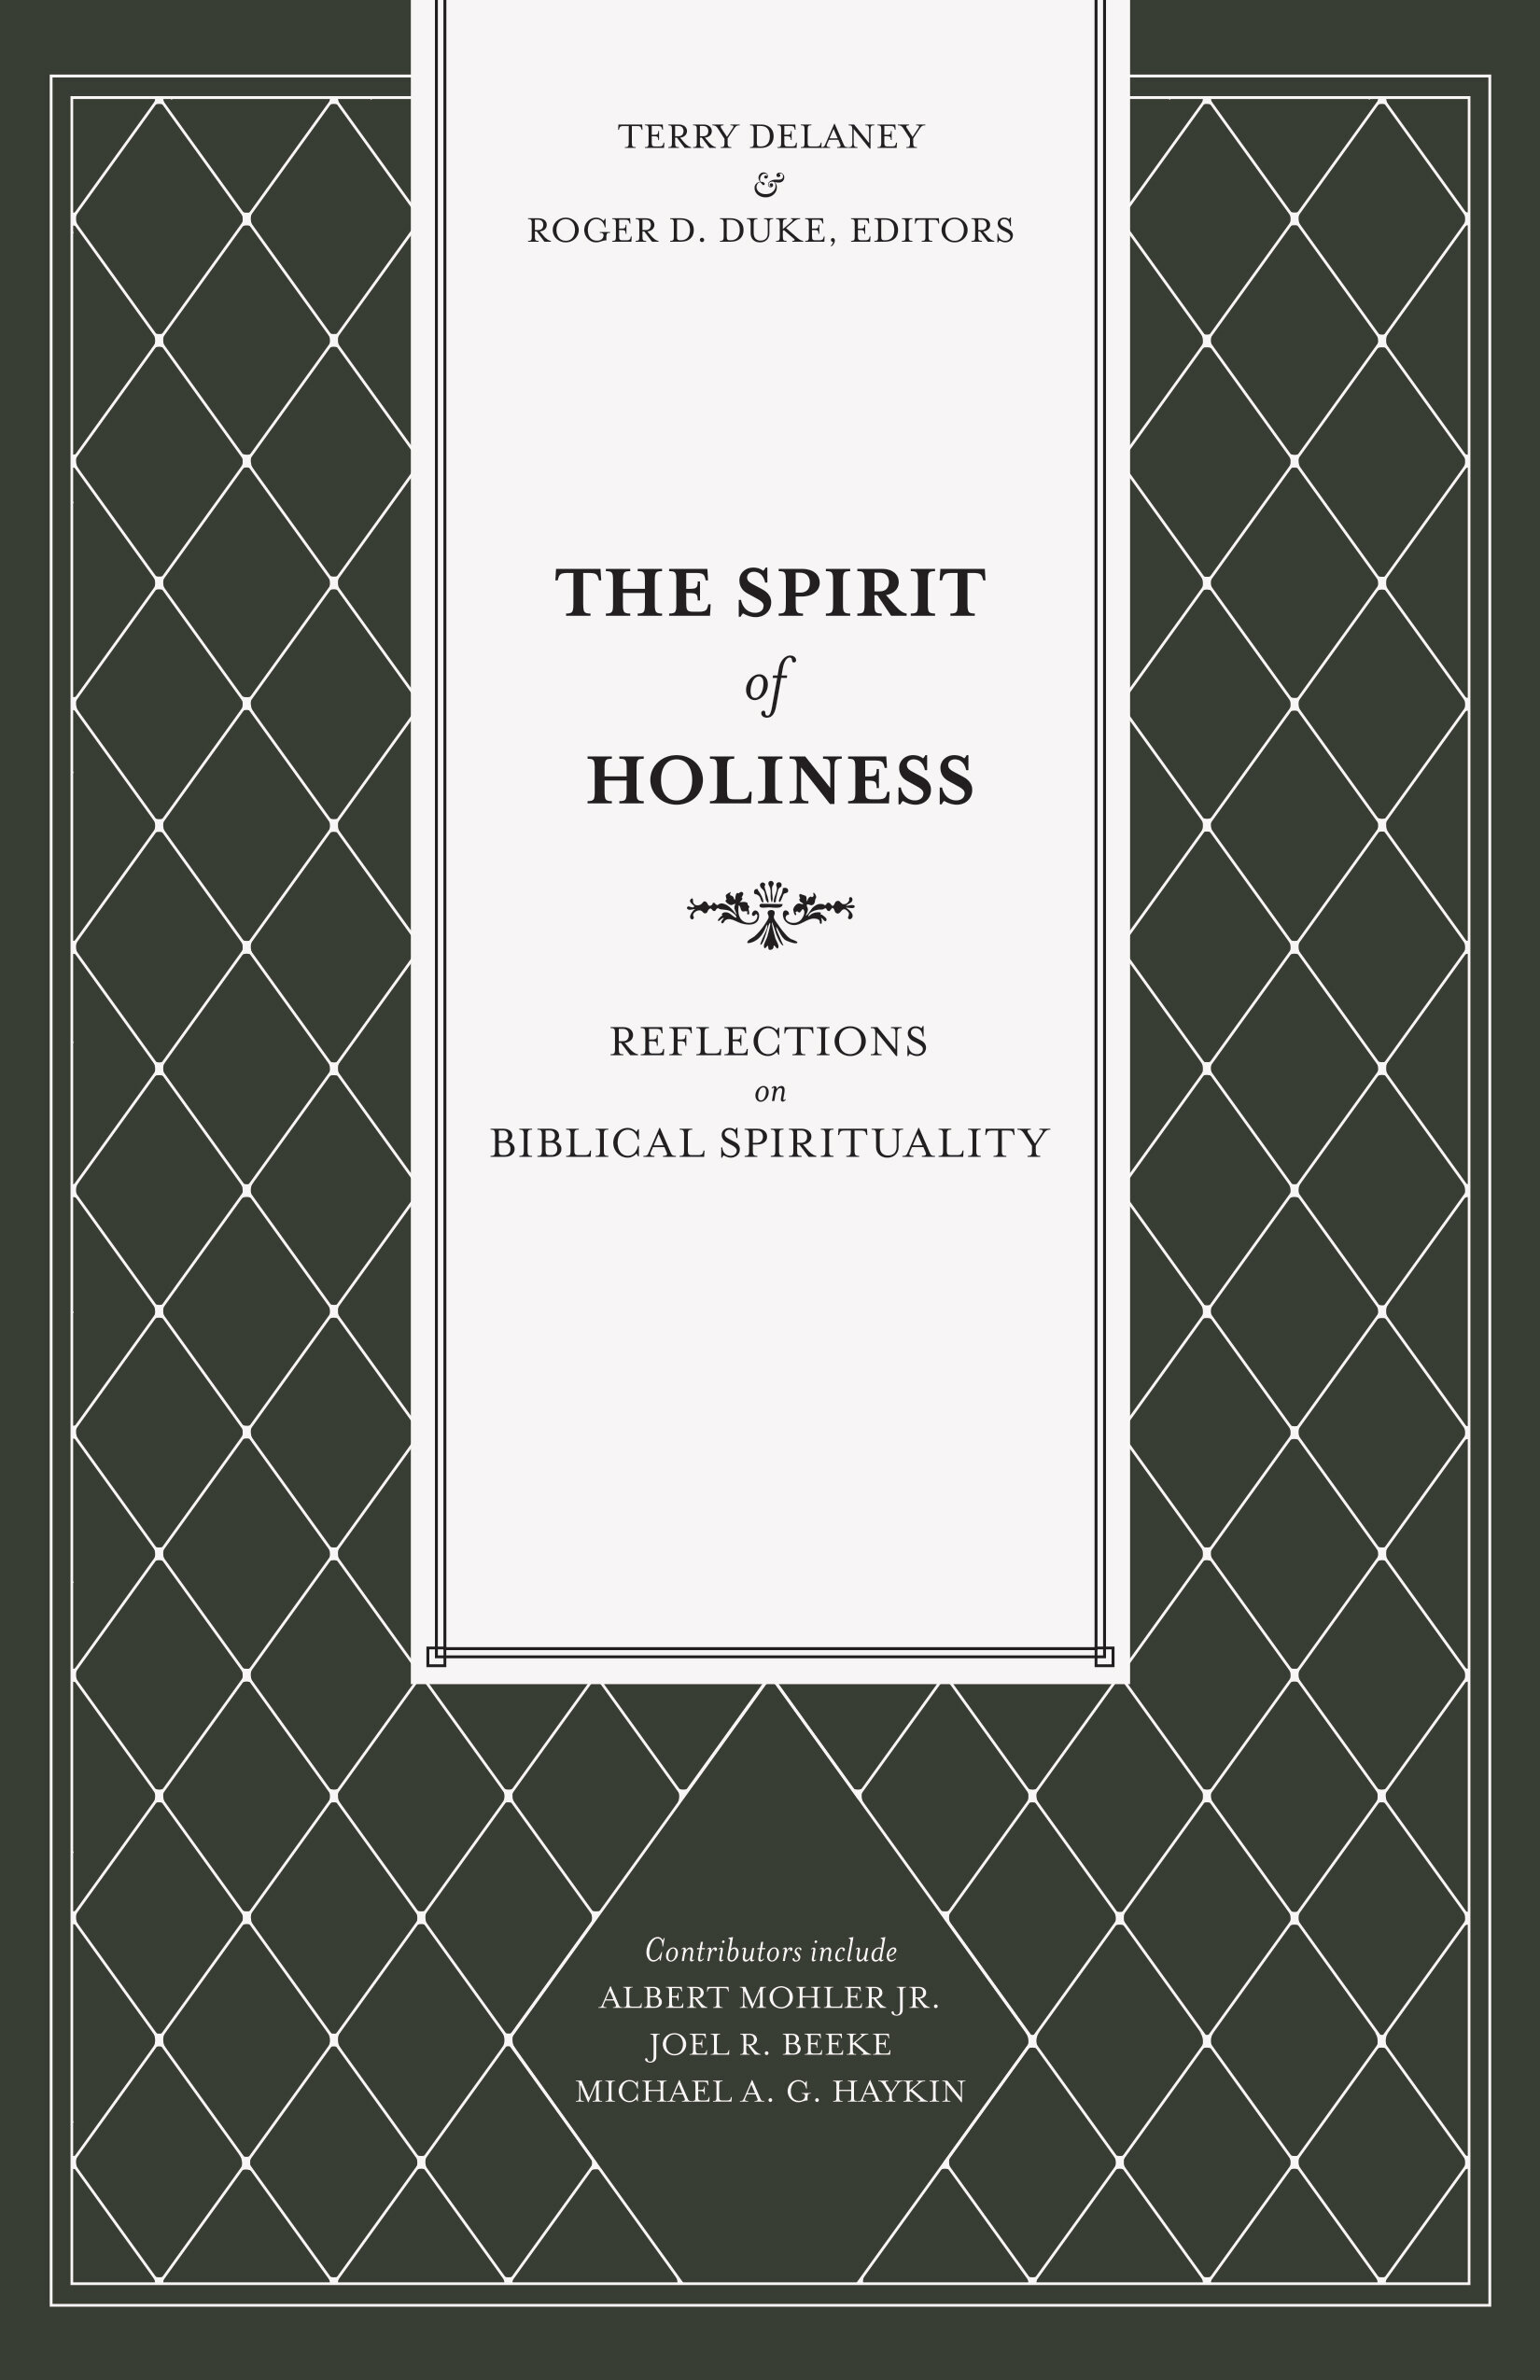 The Spirit of Holiness: Reflections on Biblical Spirituality